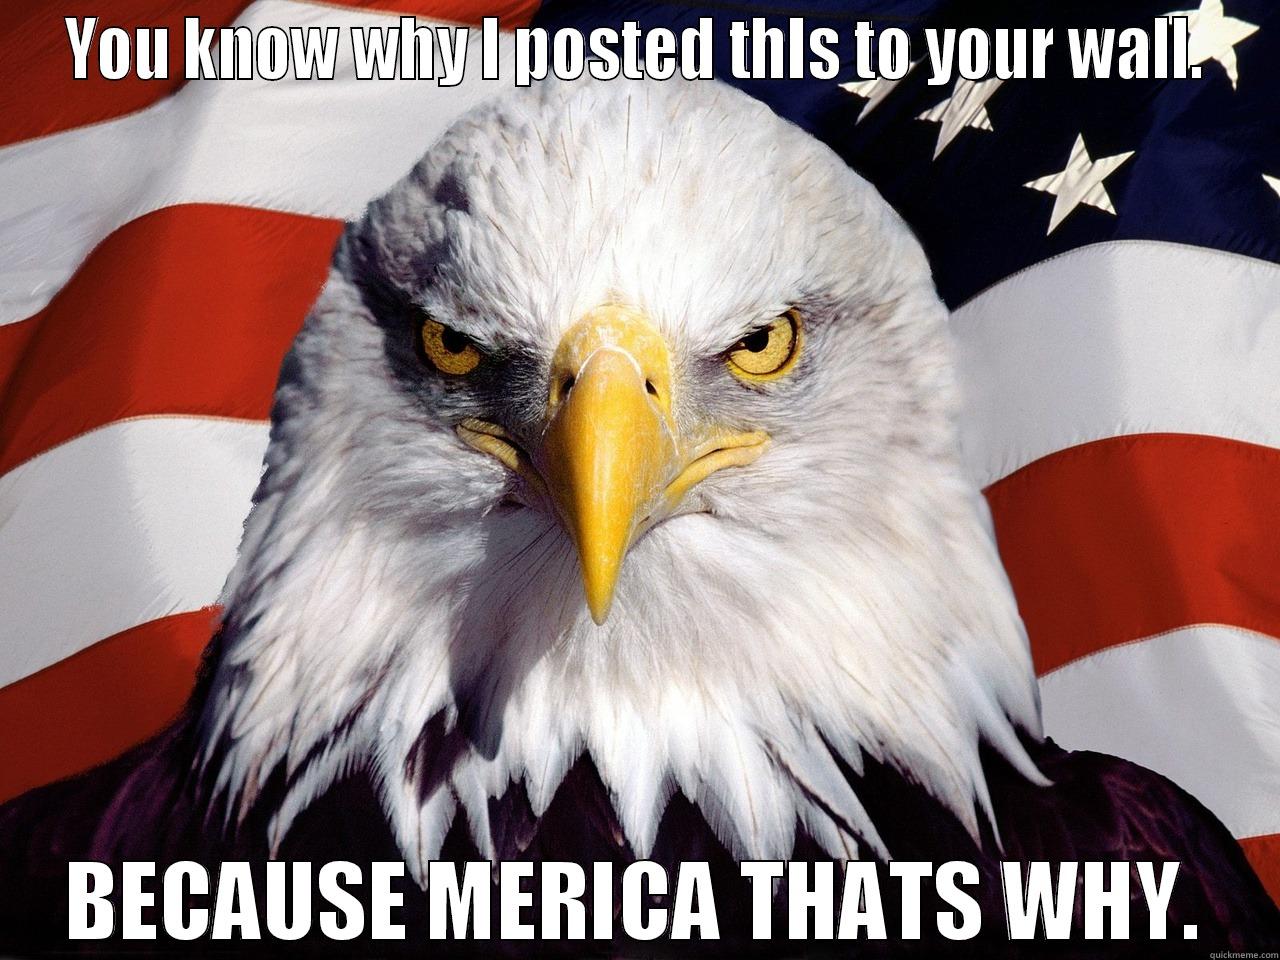 Merica mother fucker - YOU KNOW WHY I POSTED THIS TO YOUR WALL. BECAUSE MERICA THATS WHY. Misc